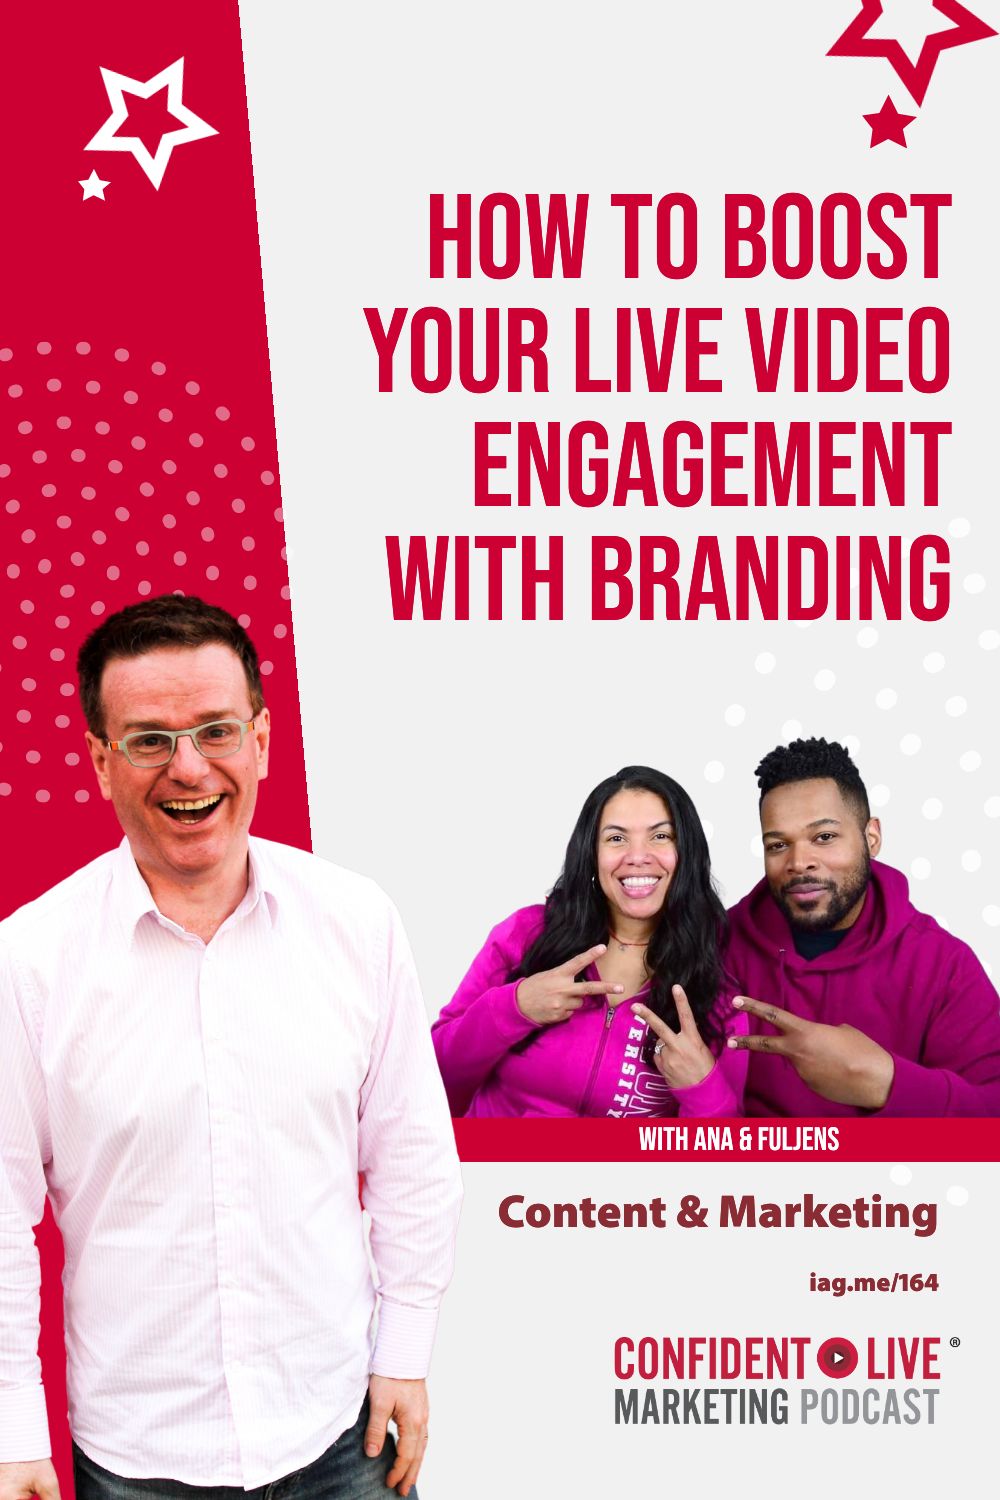 How to Boost Your Live Video Engagement with Branding